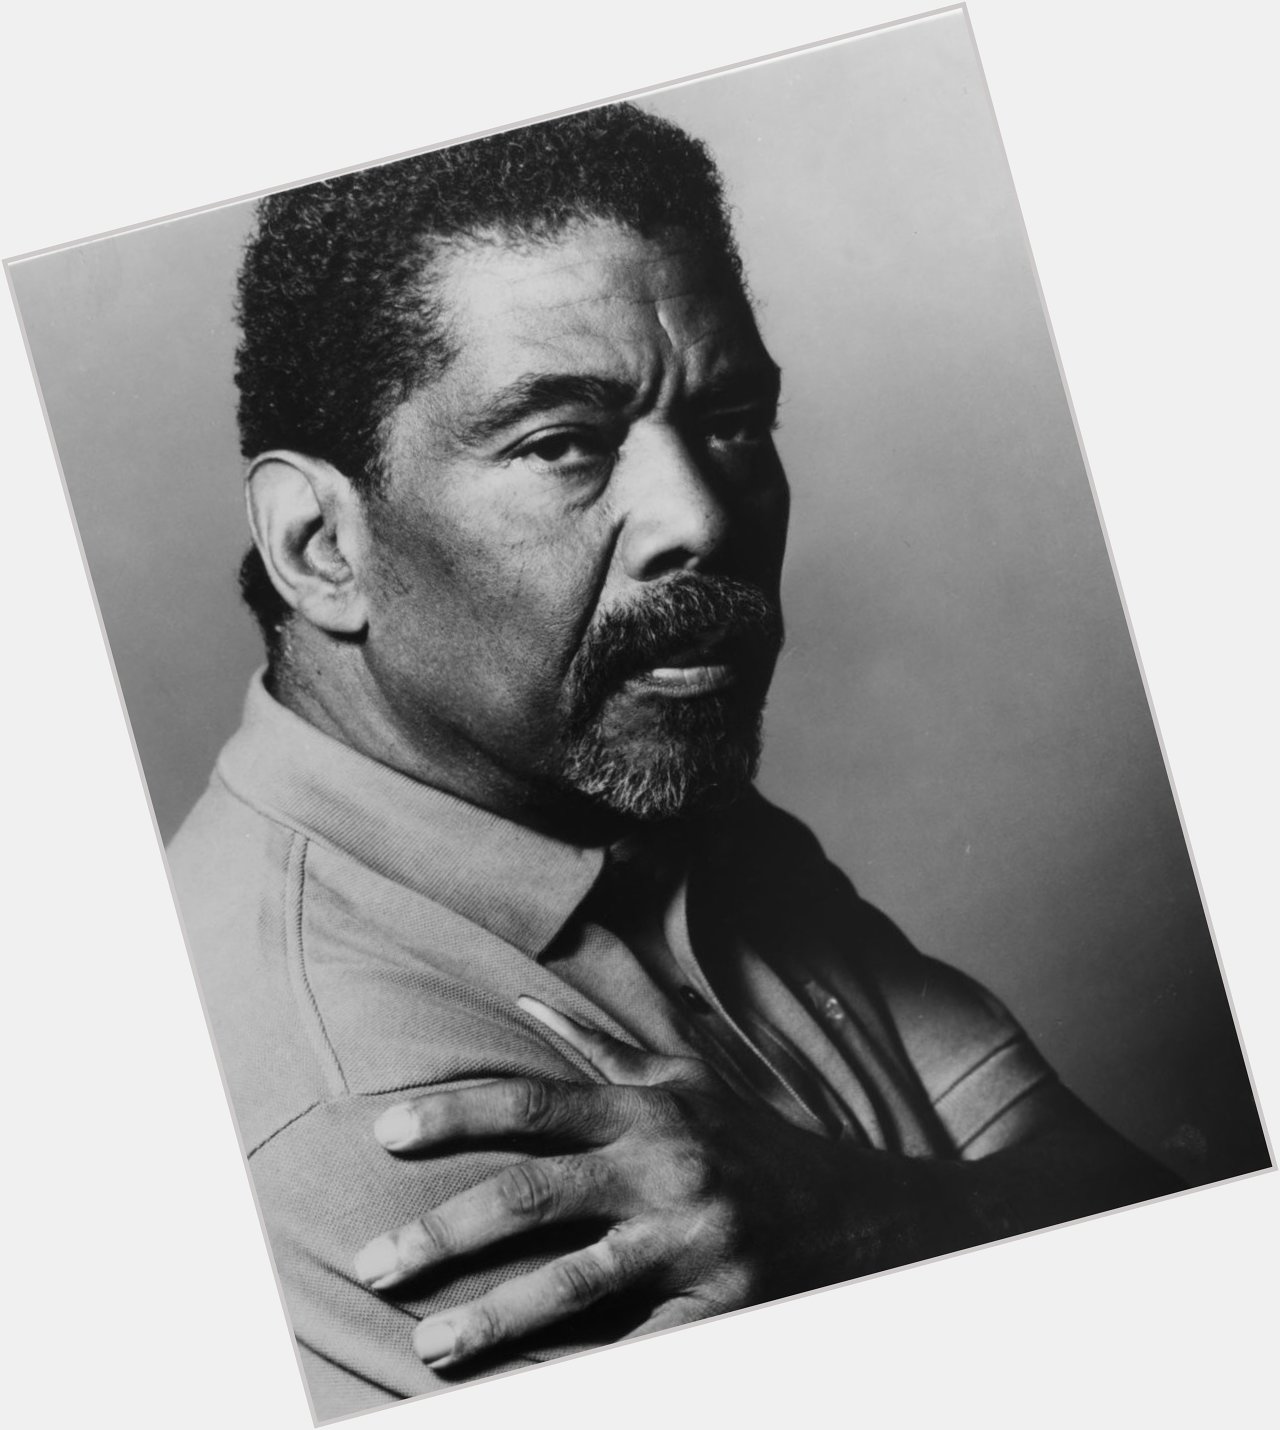 Happy Birthday to Alvin Ailey founder of the 